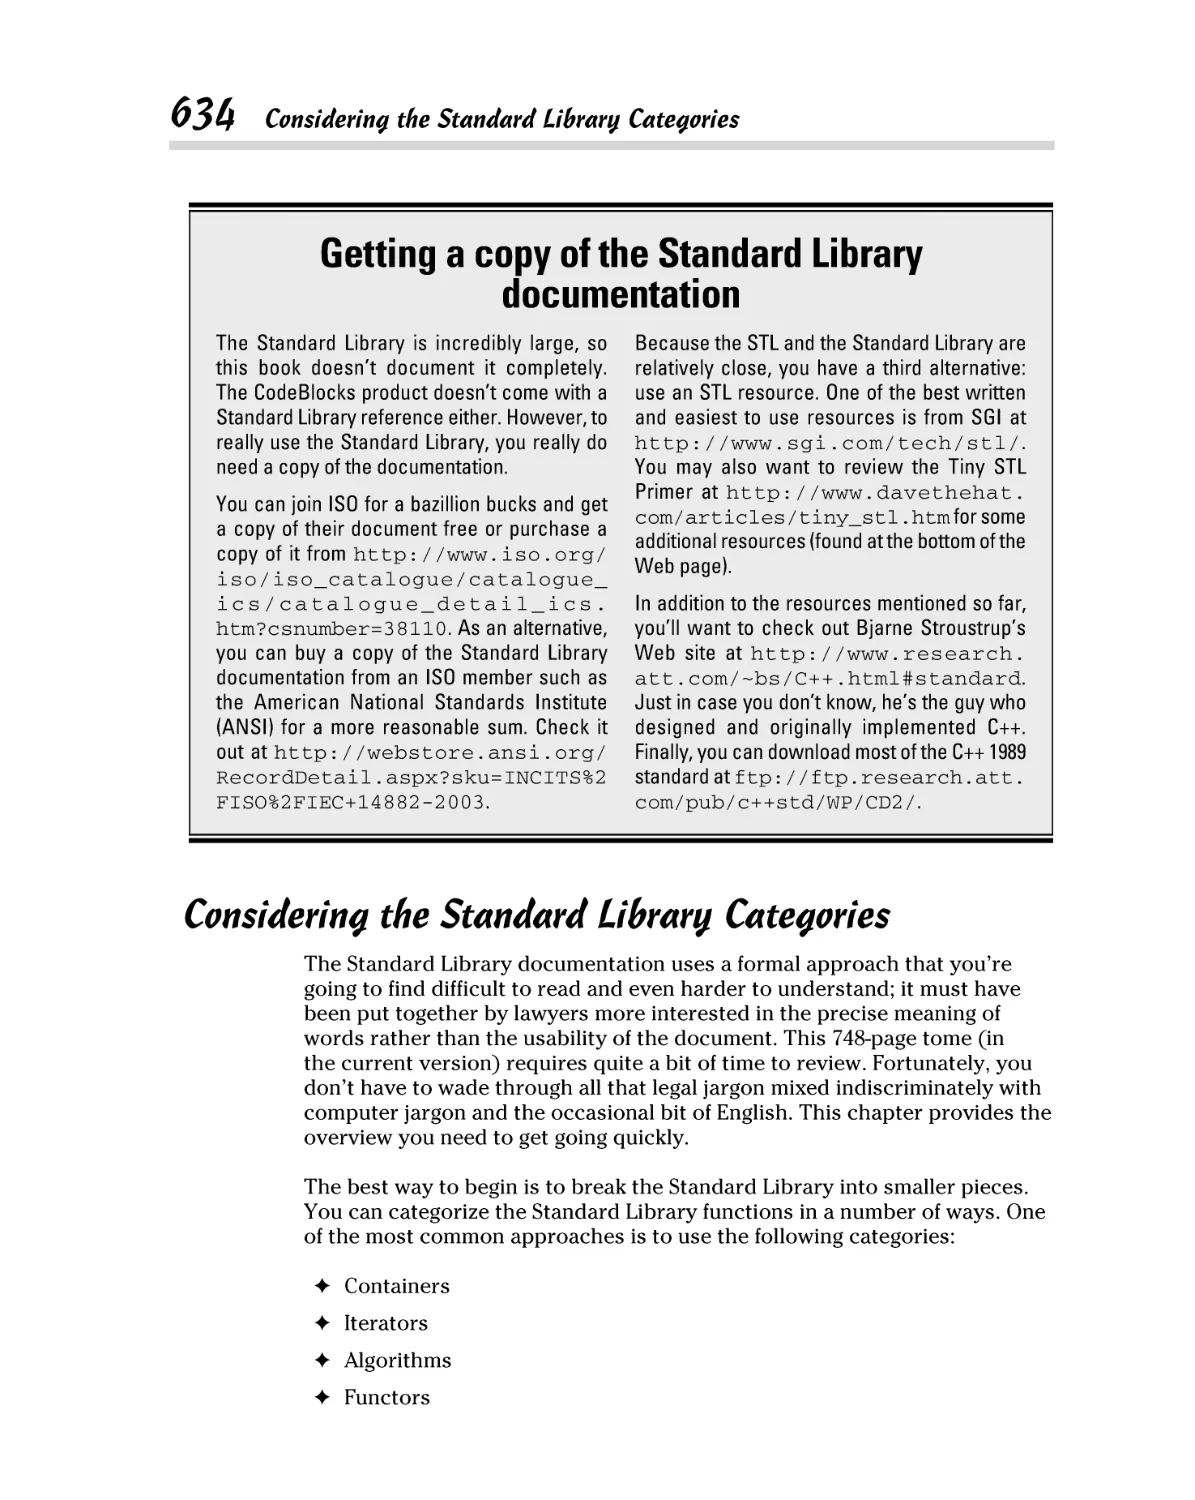 Considering the Standard Library Categories